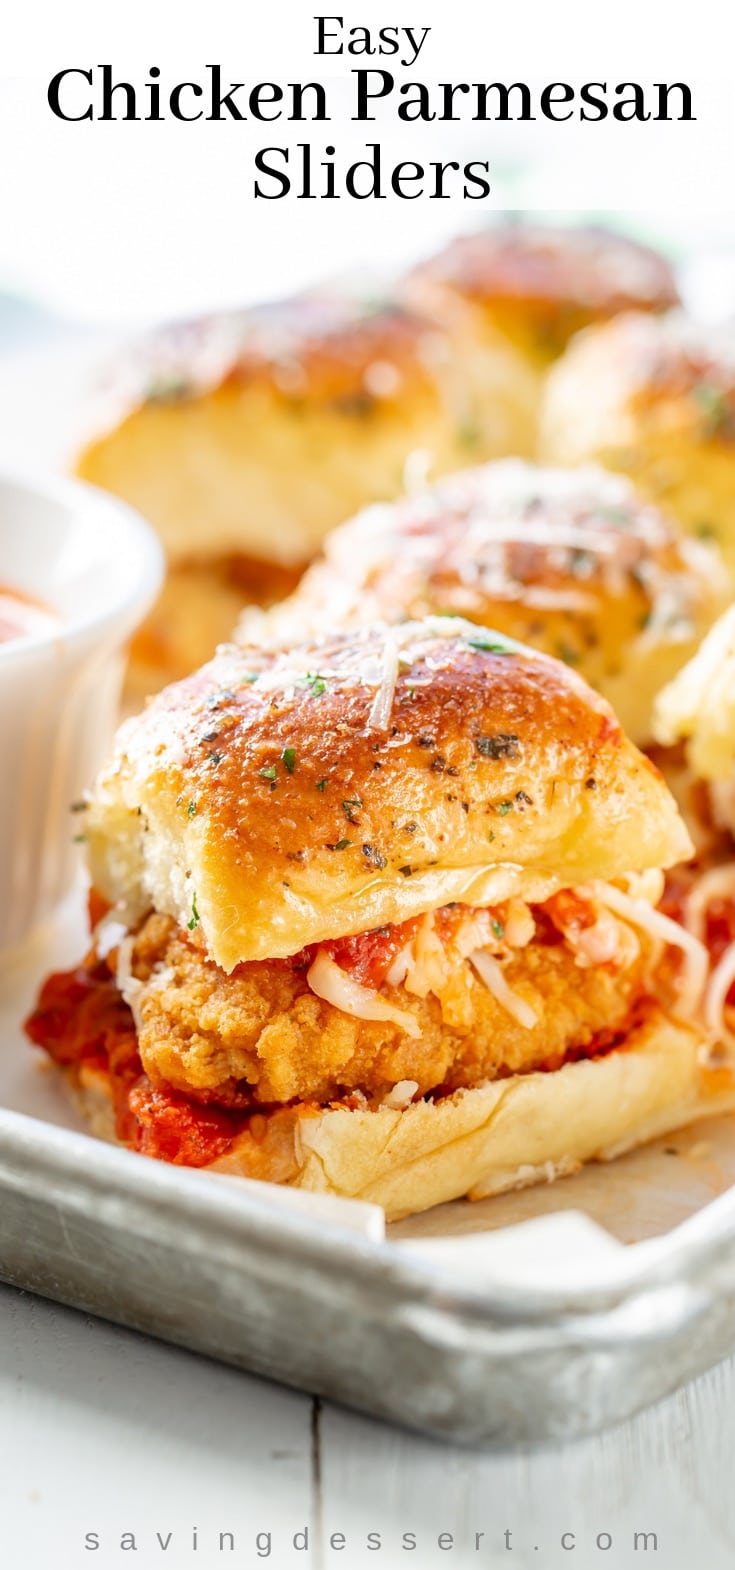 A pan loaded with chicken parmesan sliders with cheese and pizza sauce